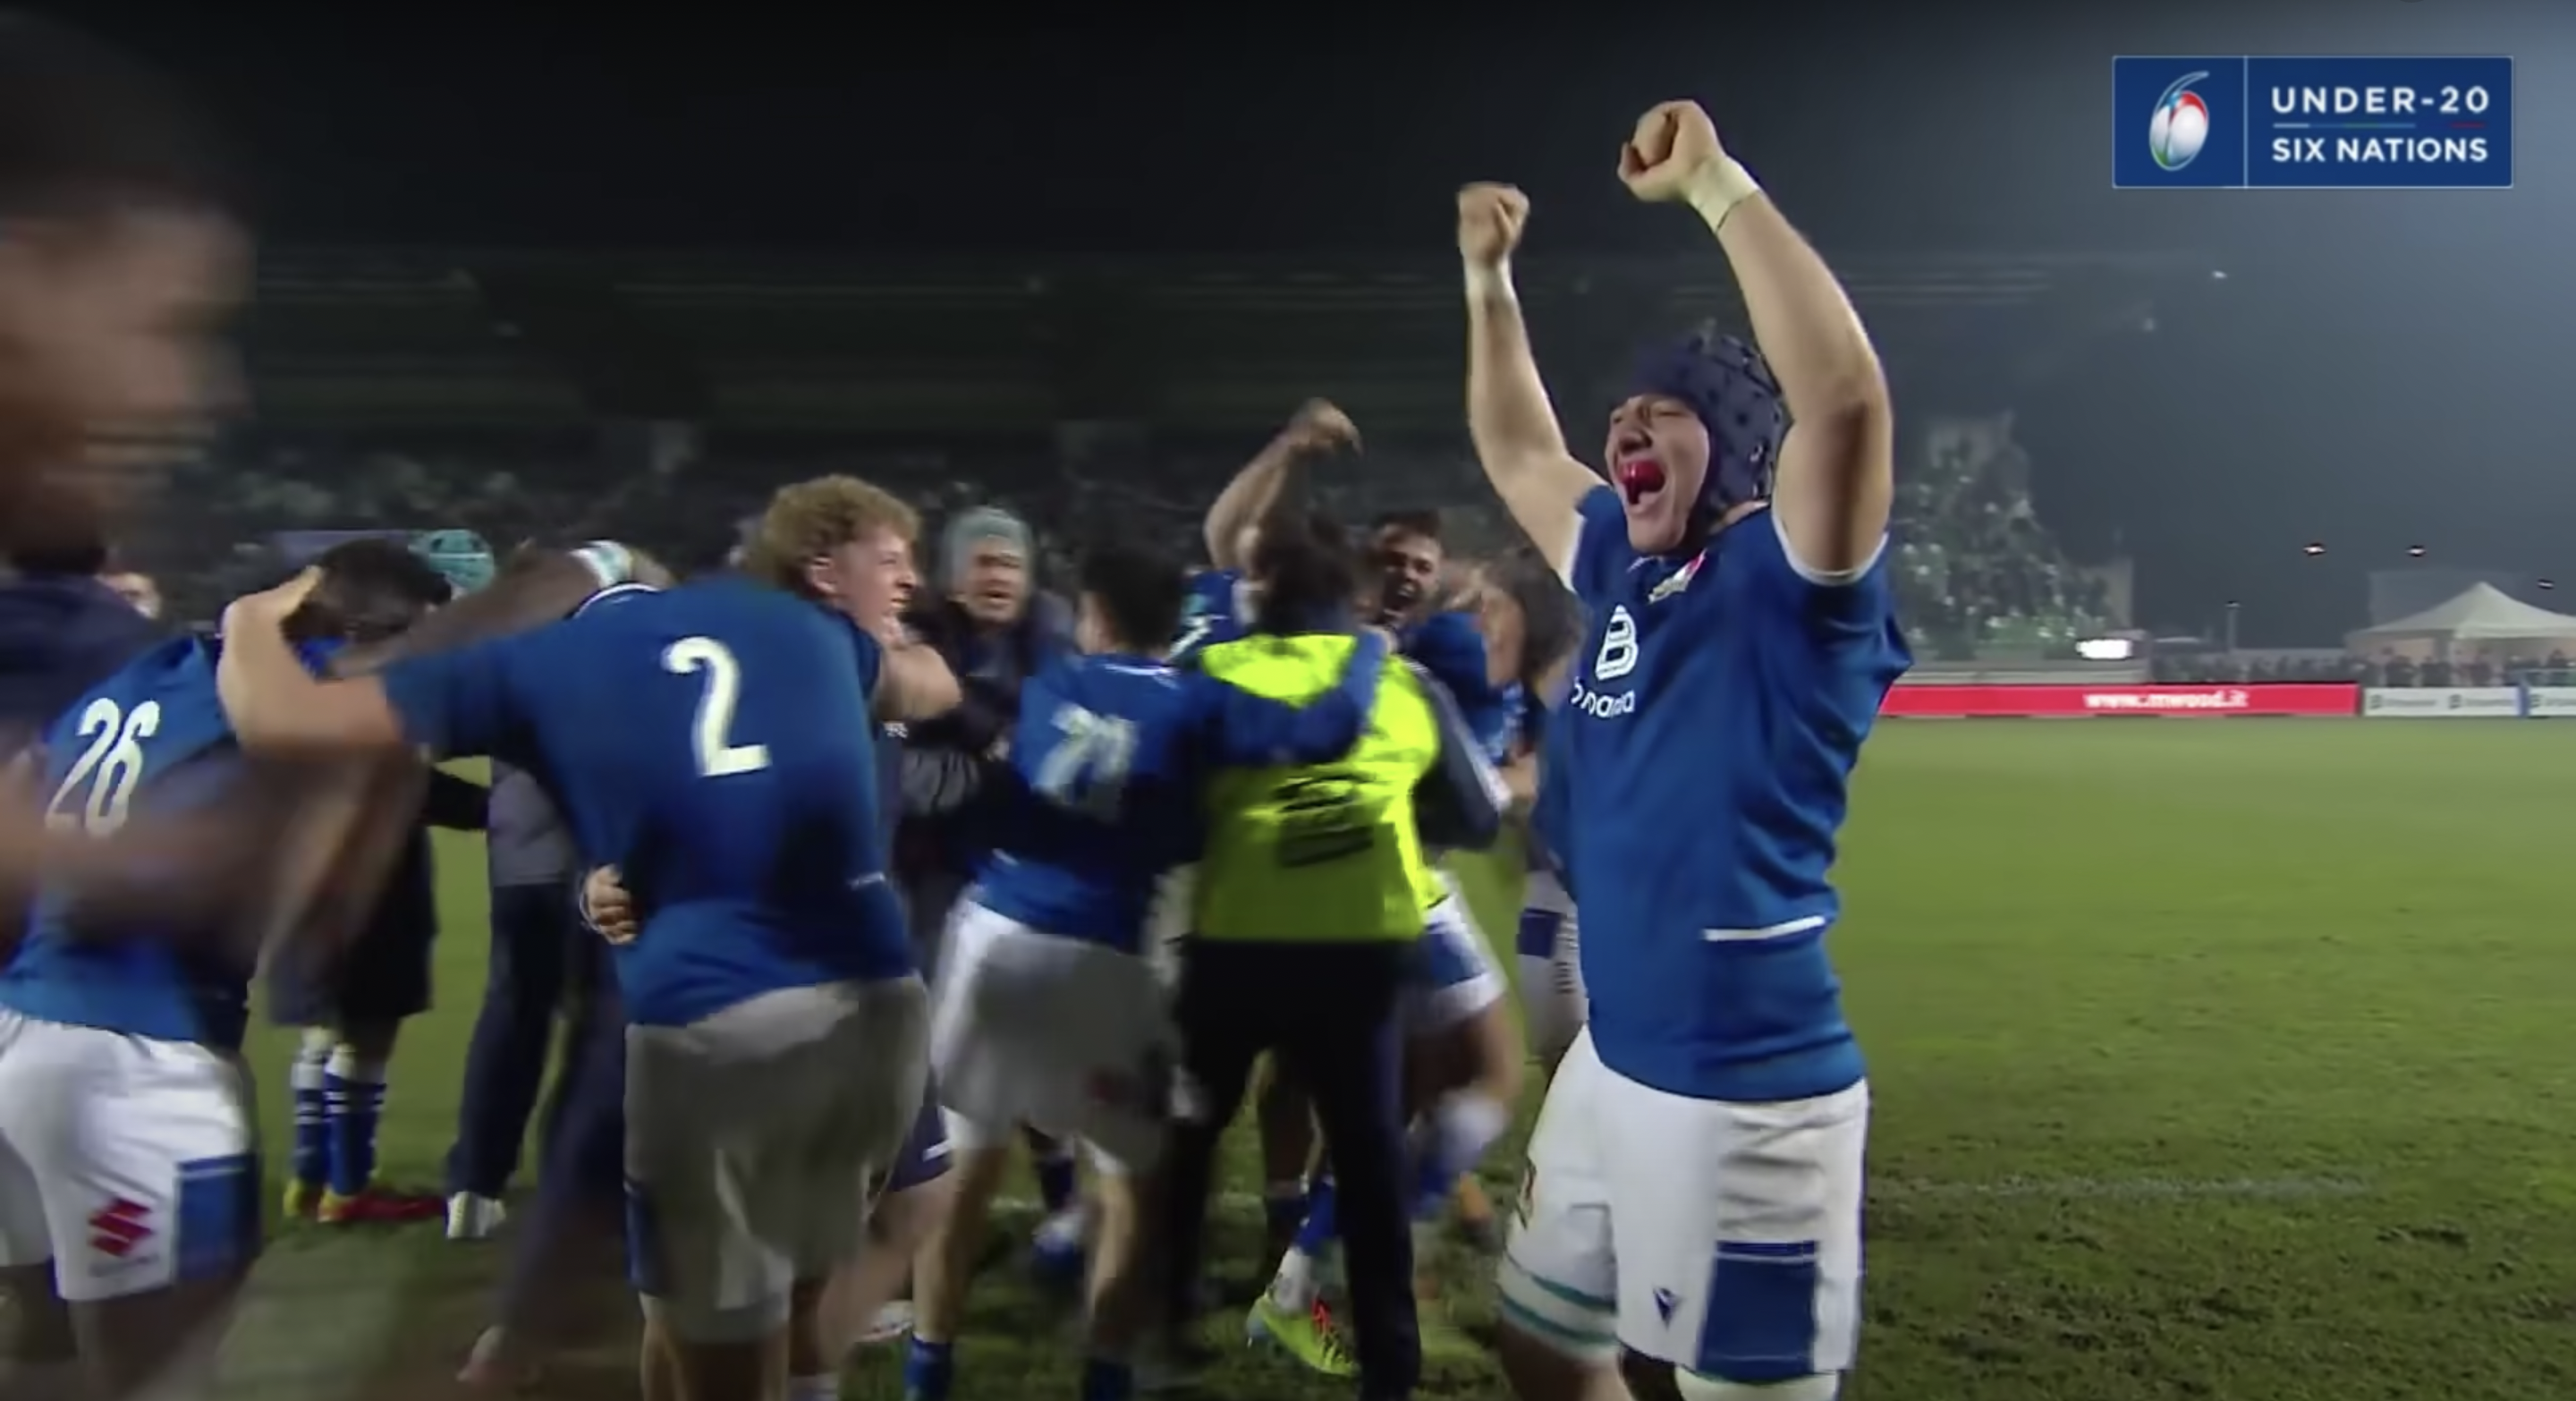 Italy U20s have shocked the rugby world